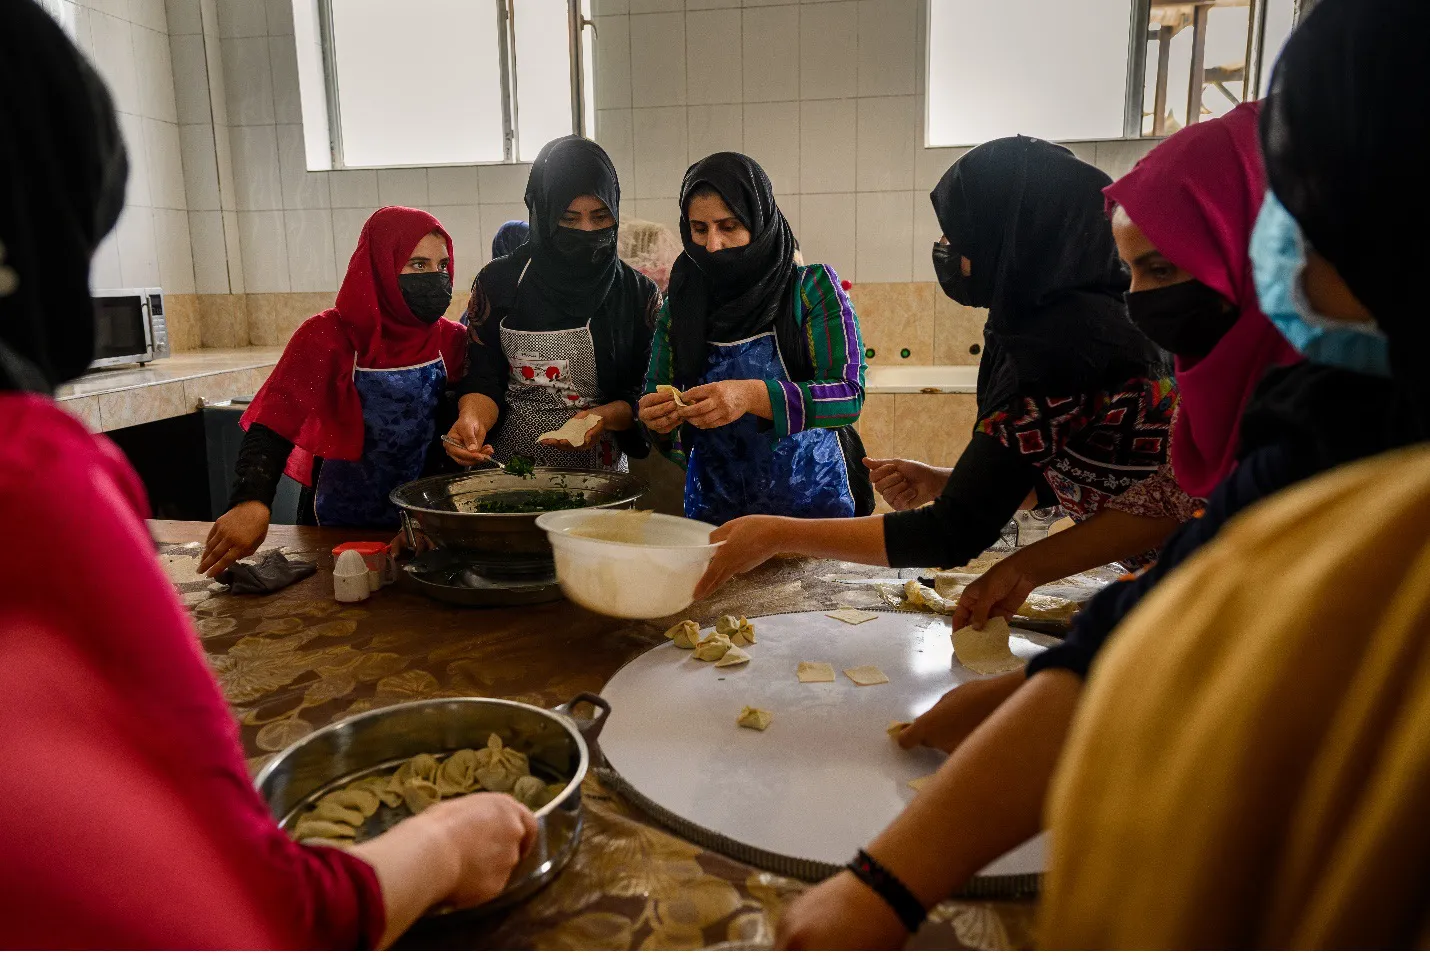 A group of women in head coverings and masks gather around a table, preparing food in bowls and on plates.